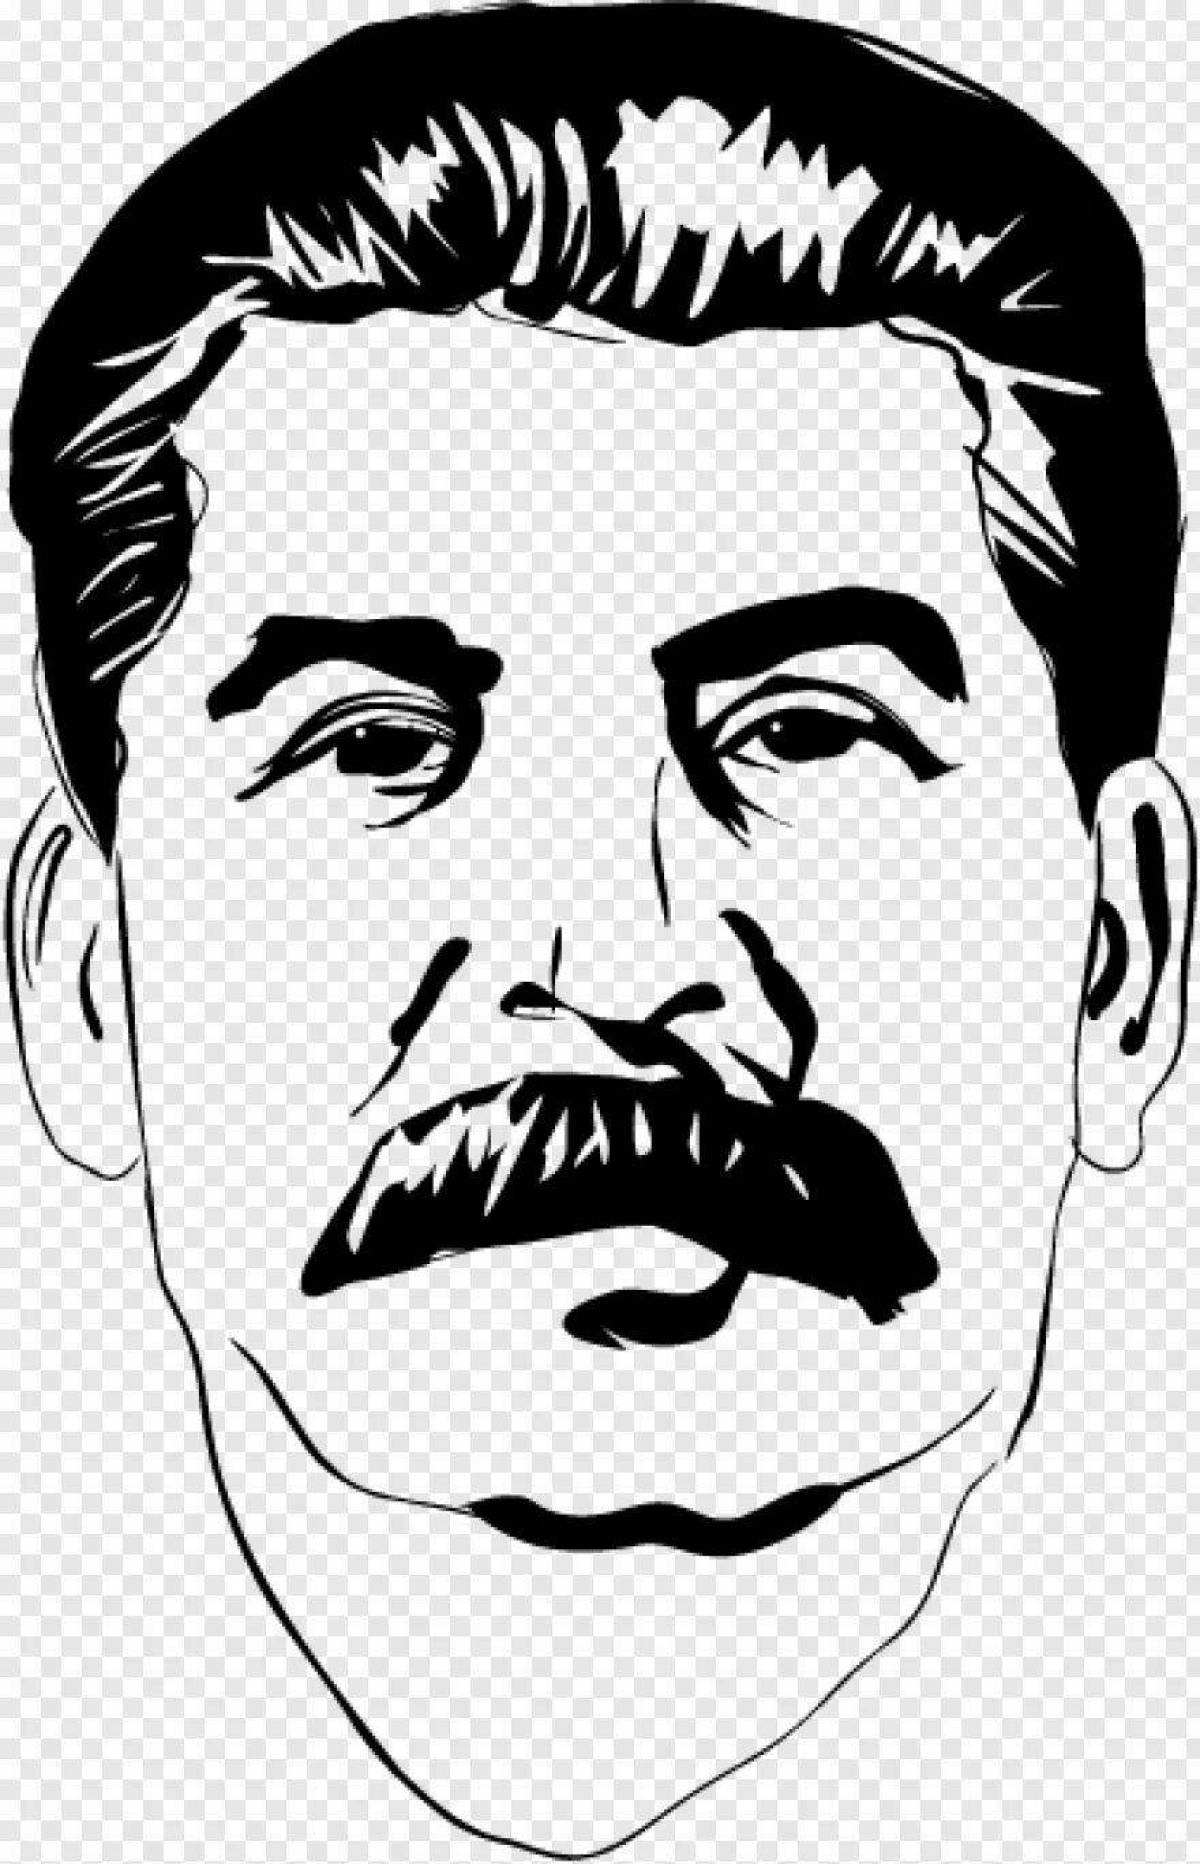 Great coloring of stalin